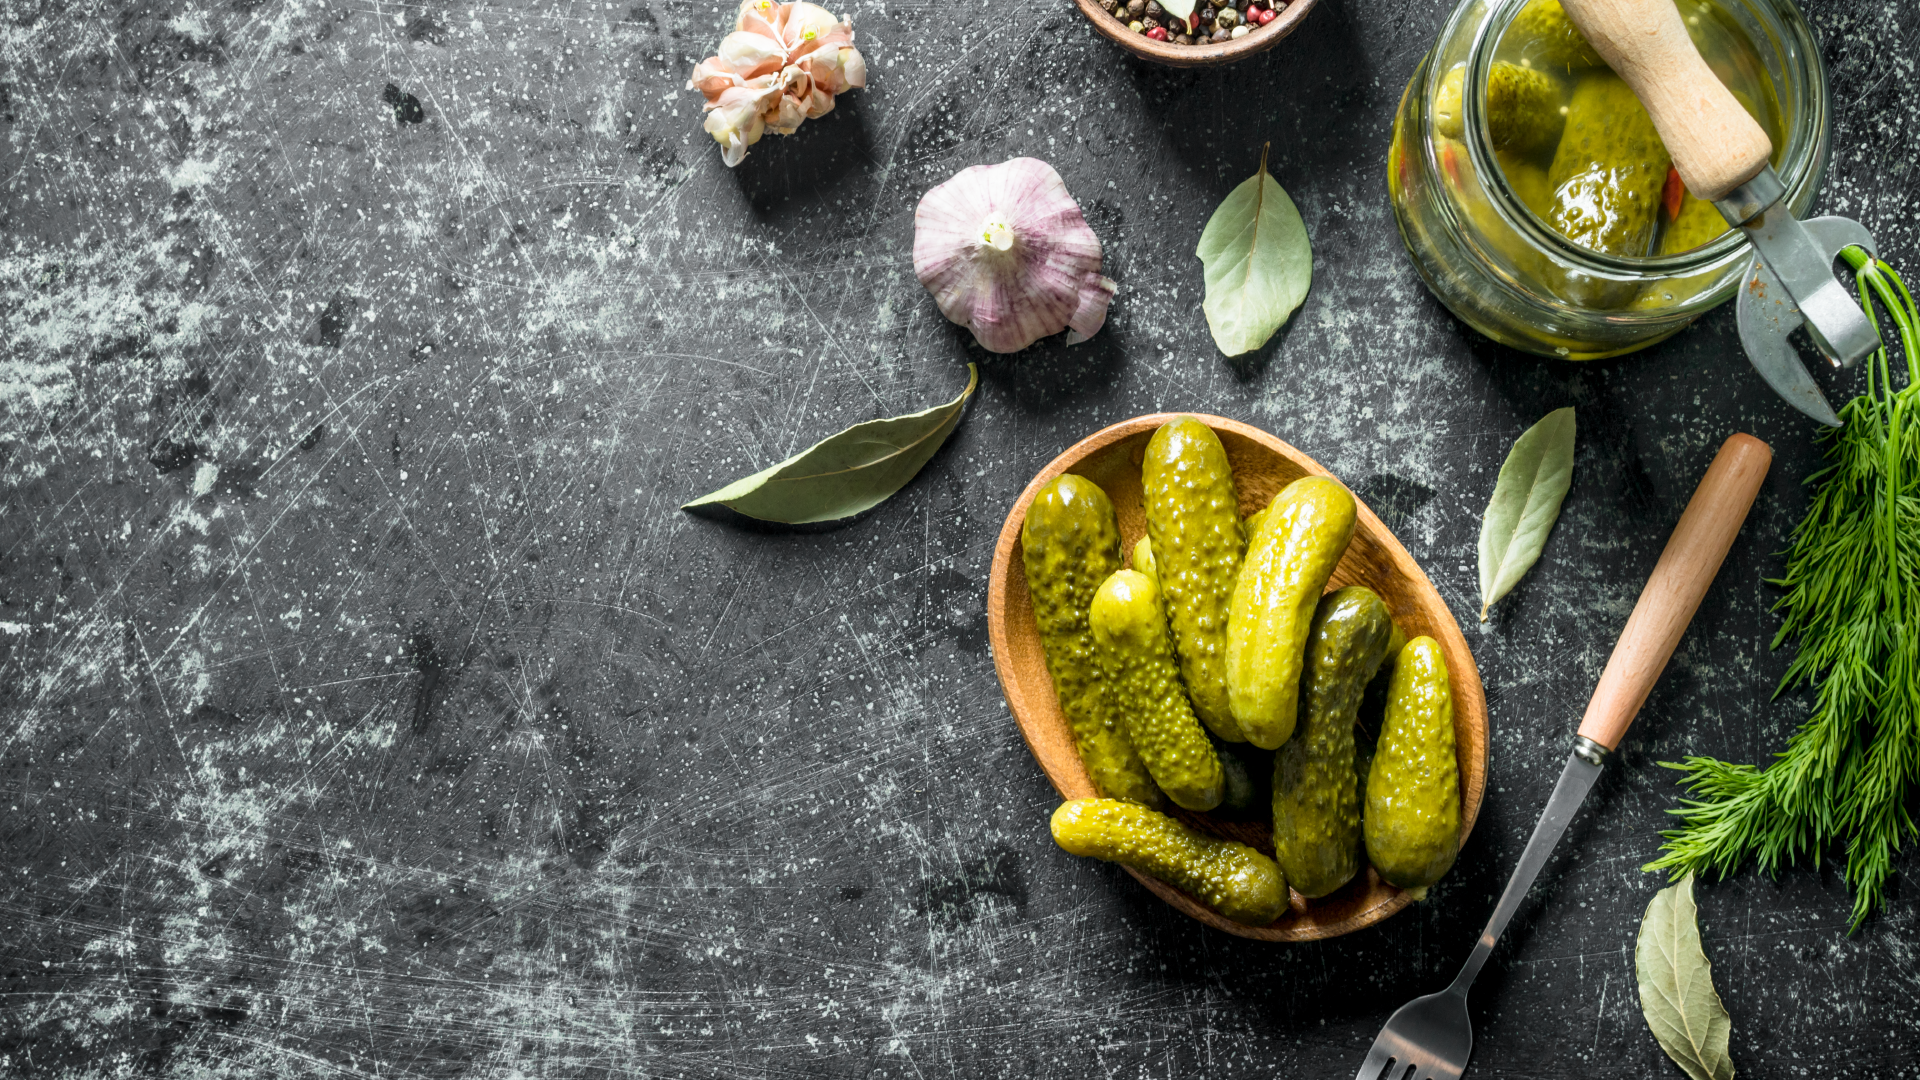 How Much and When Should Pickle Consumption Be?